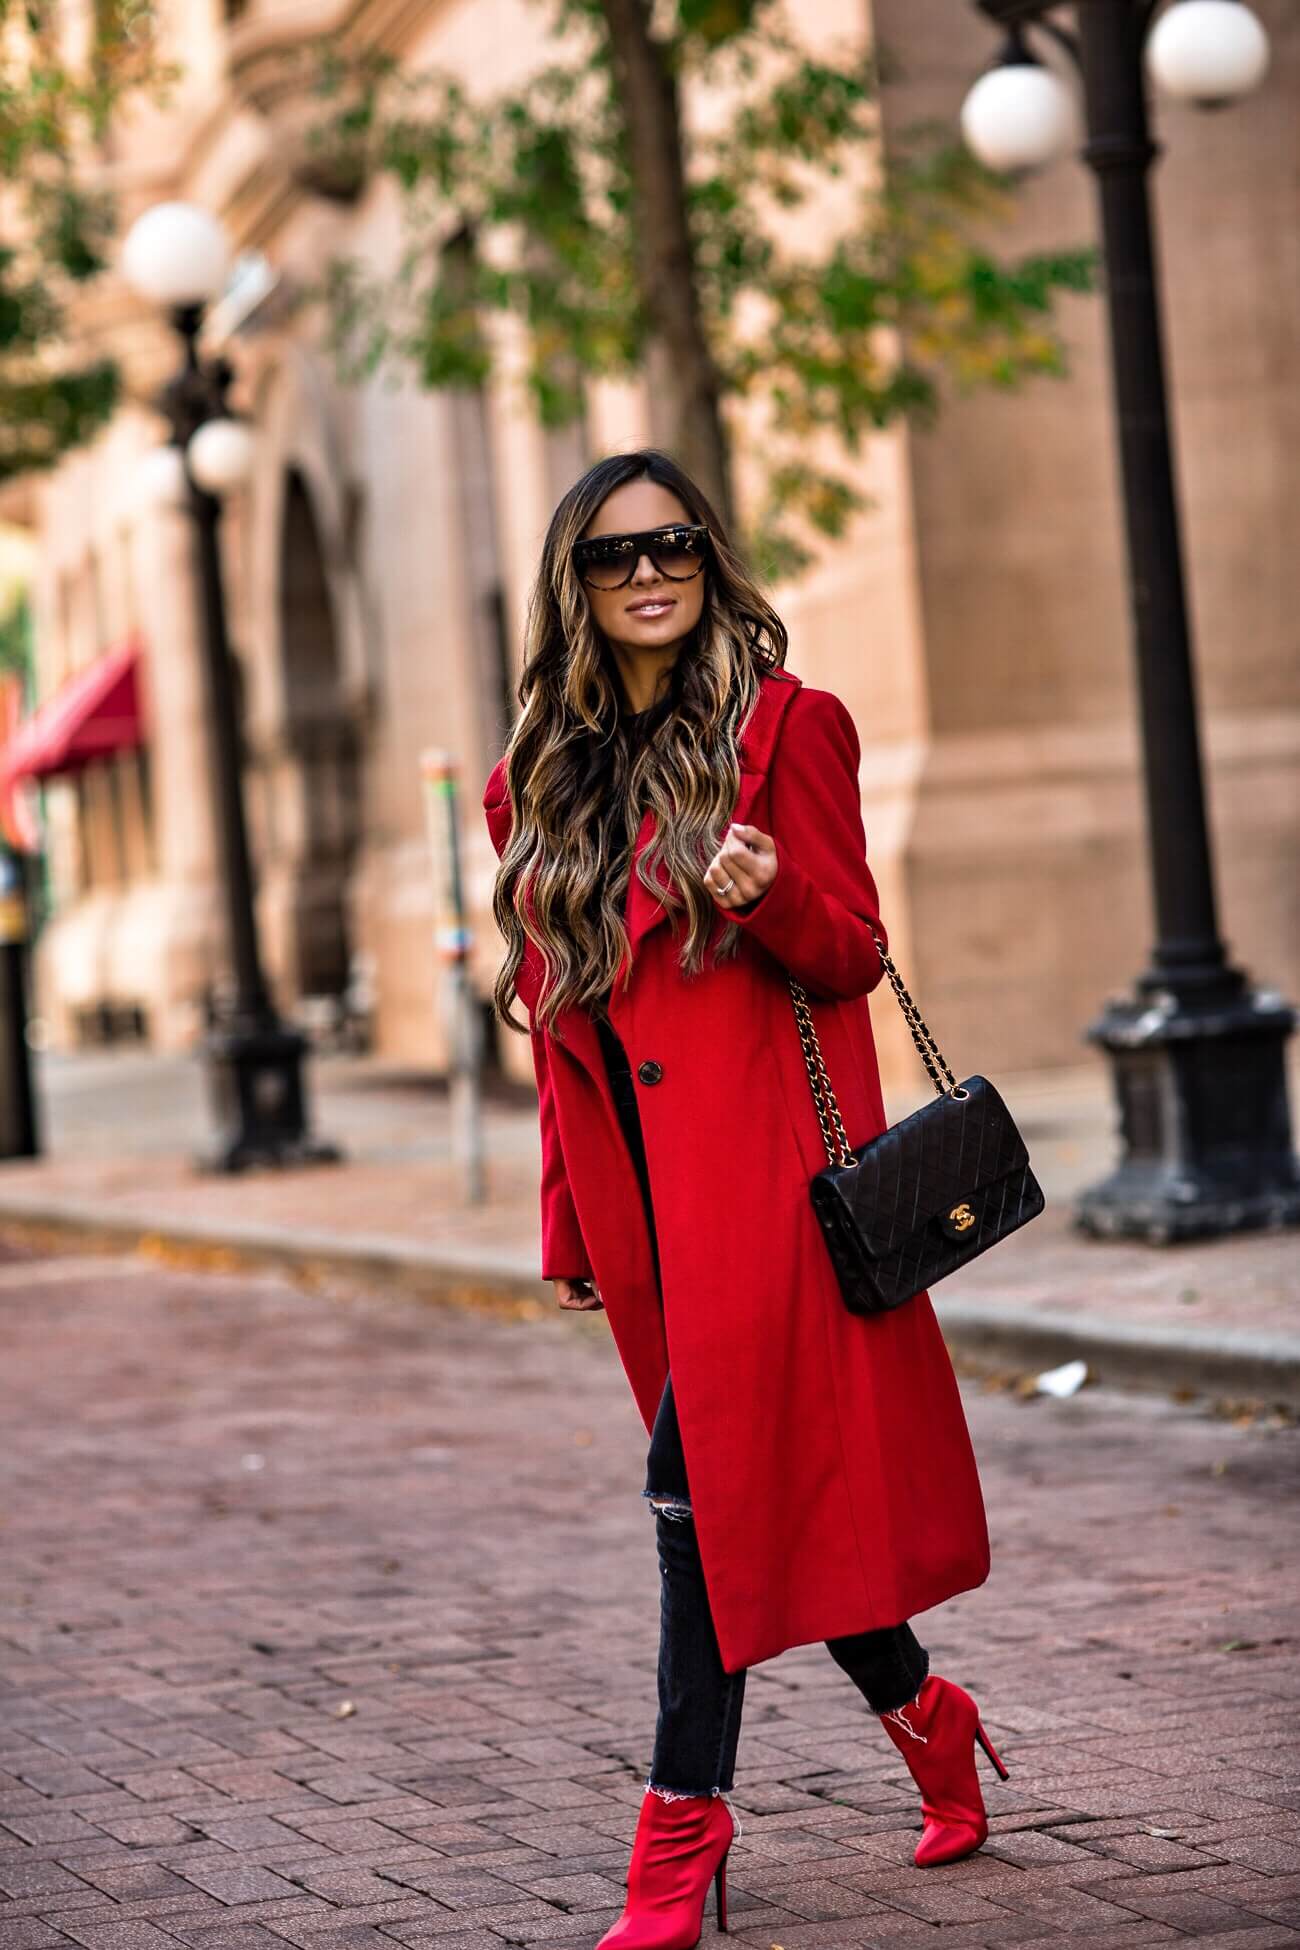 fashion blogger mia mia mine wearing a red coat by kendall + kylie and a chanel bag